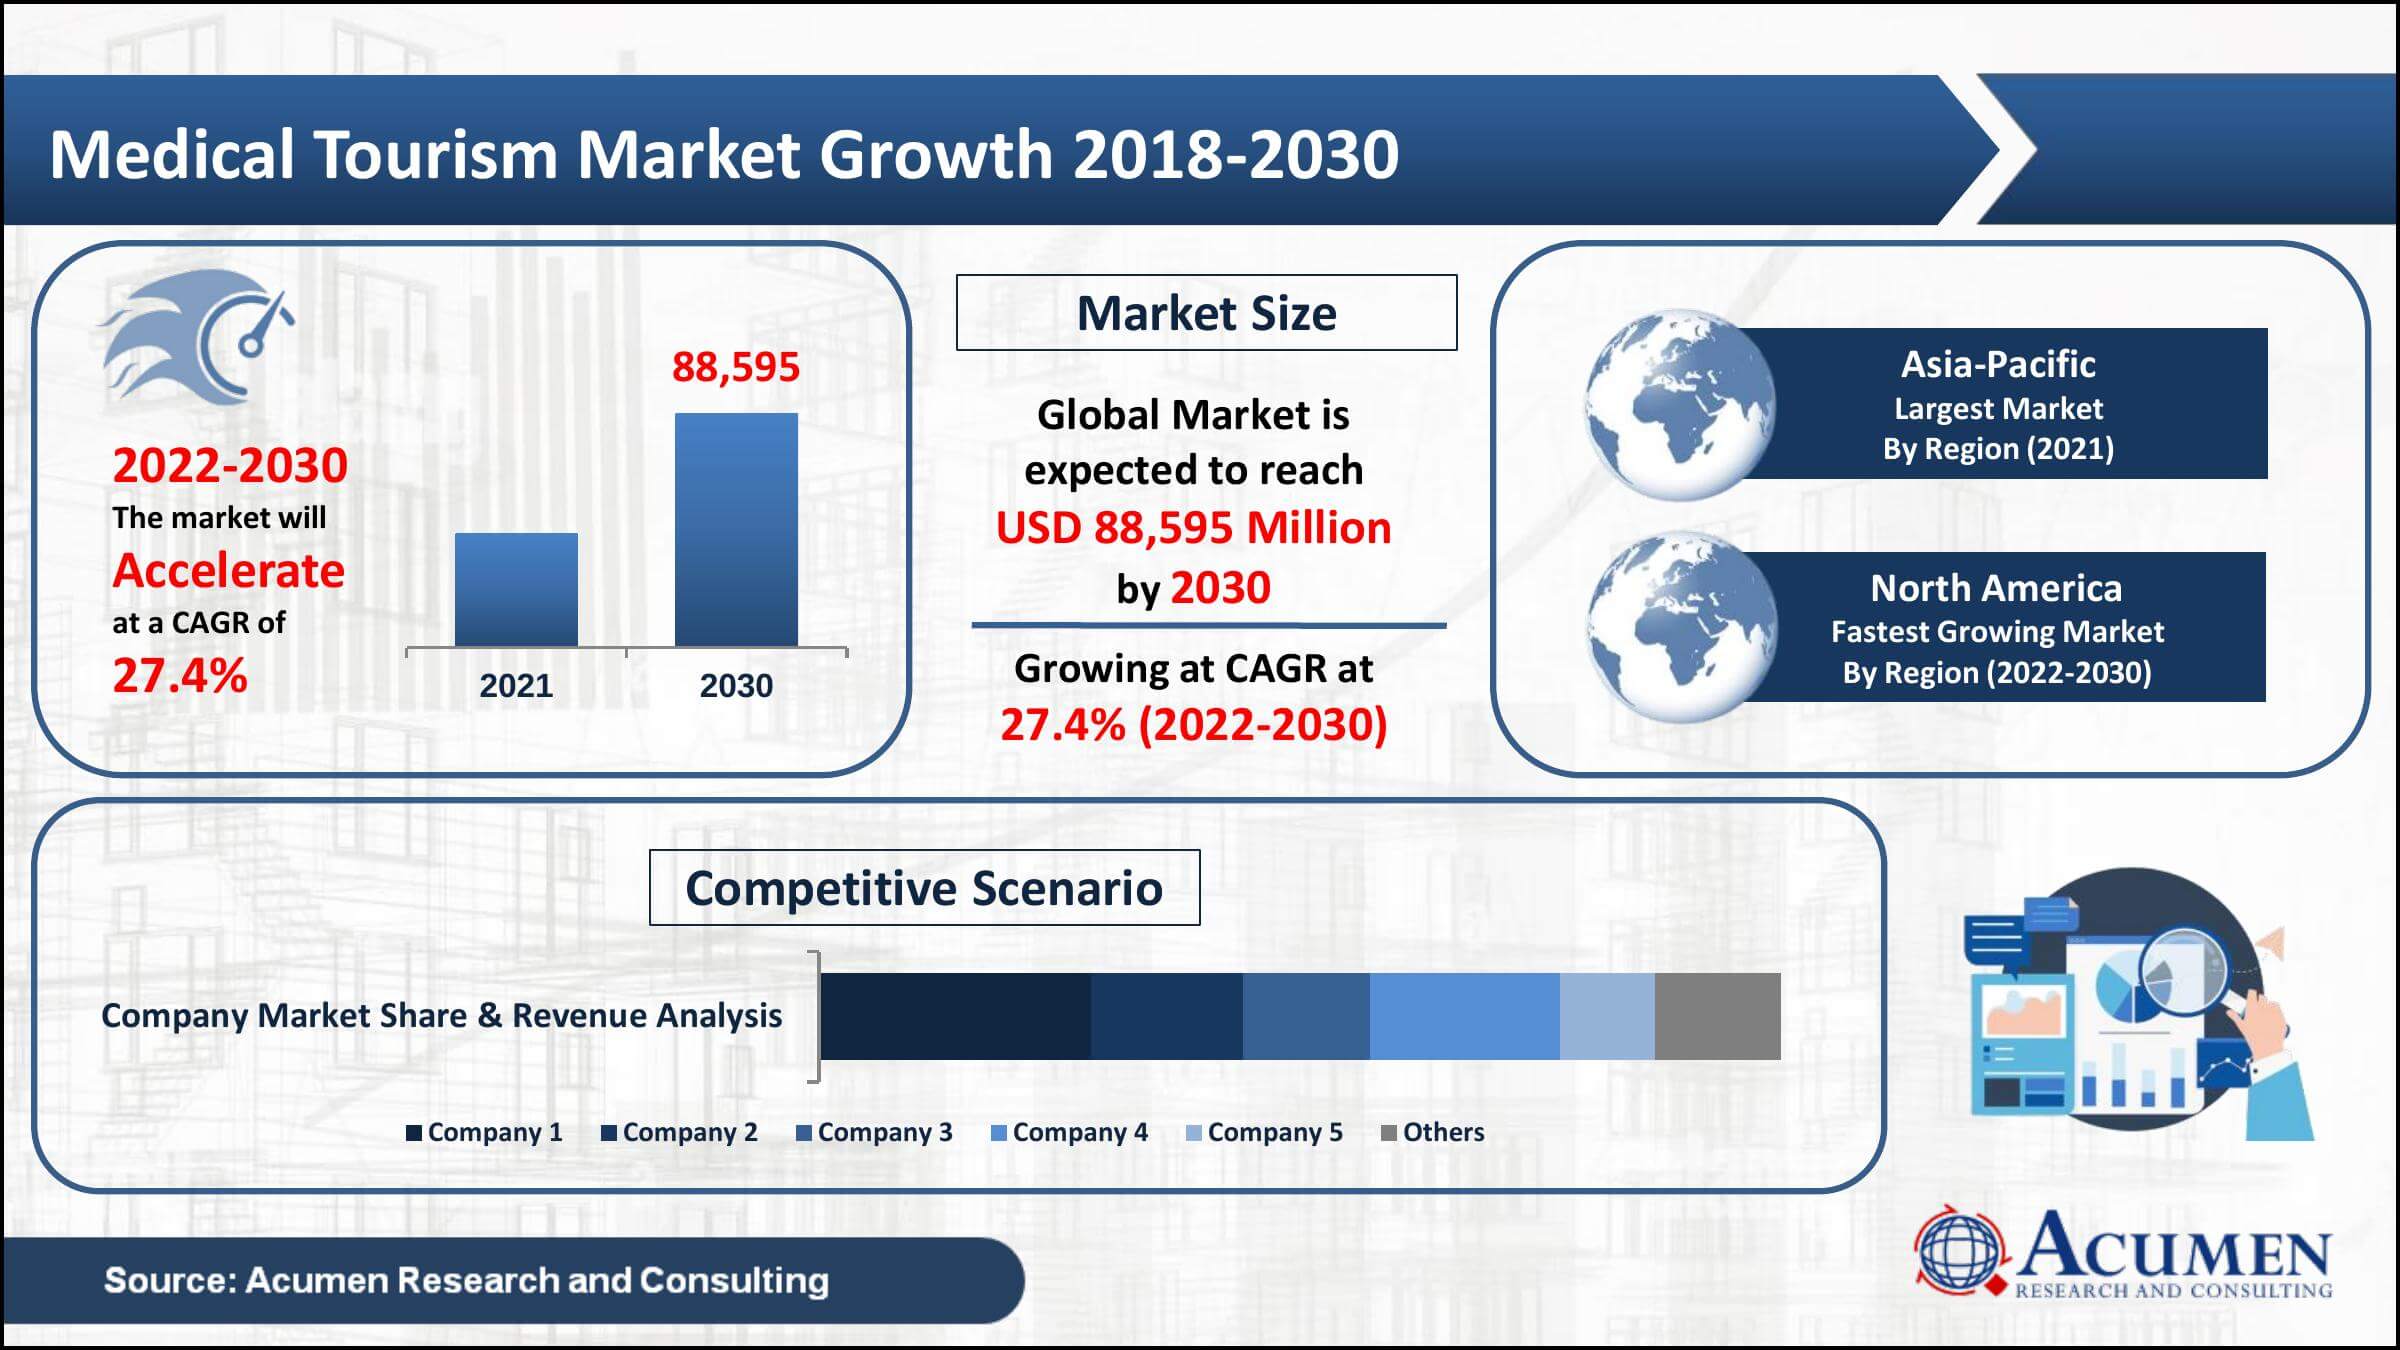 Global medical tourism market revenue collected USD 11,395 Million in 2021, with a 27.4% CAGR between 2022 and 2030